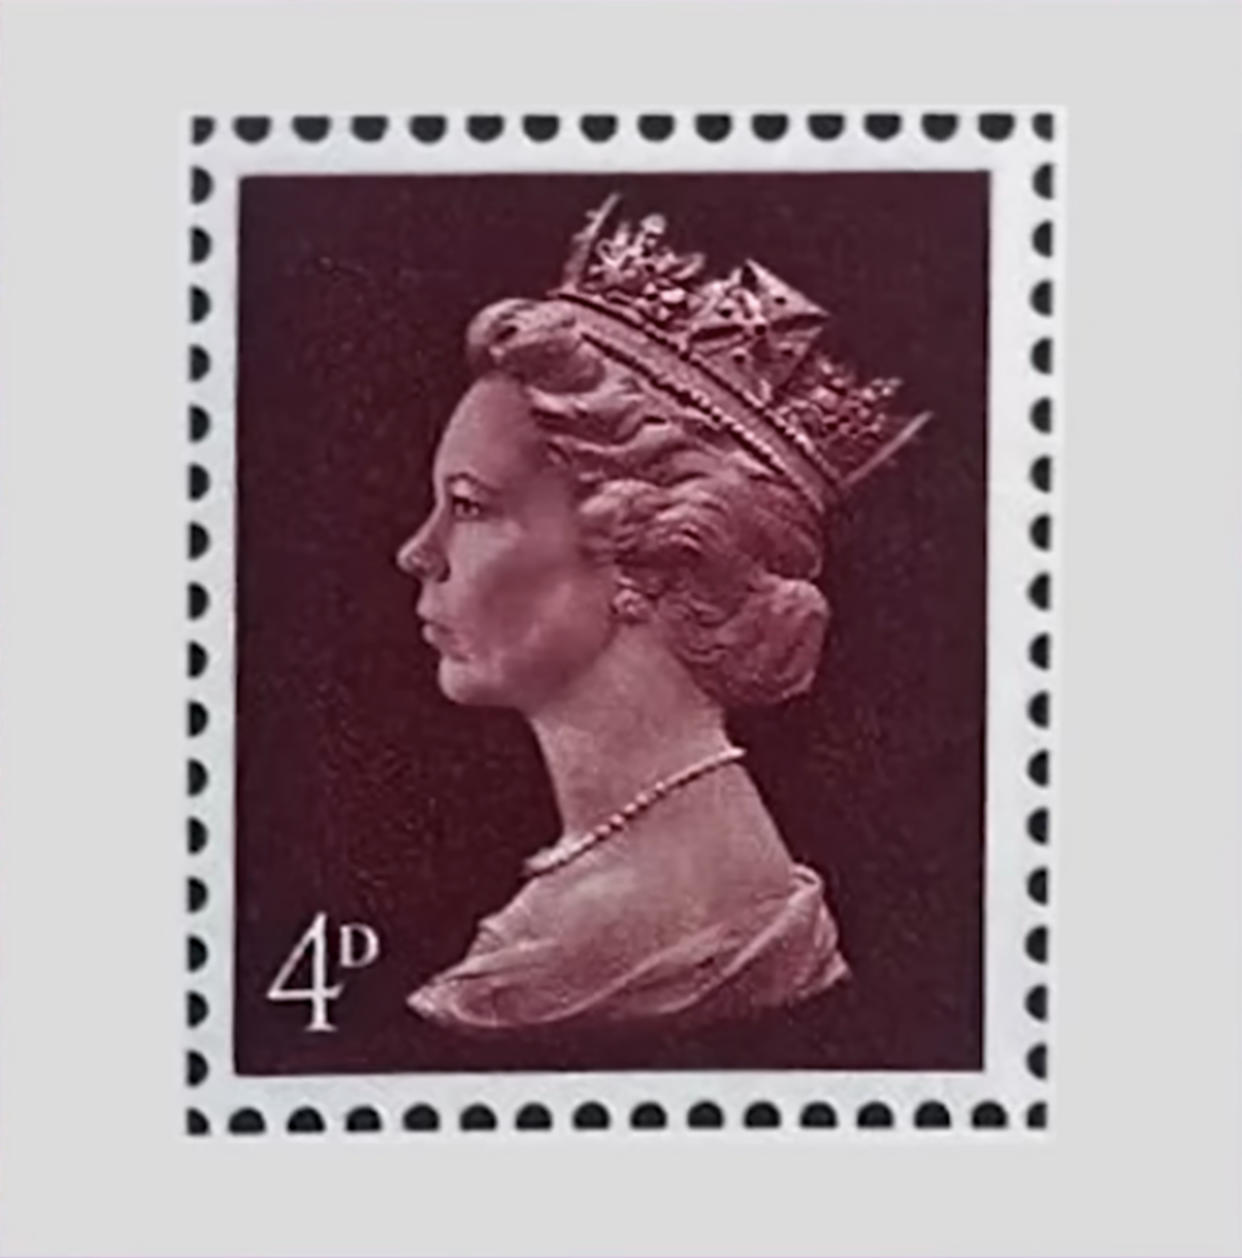 Olivia Colman's face on a stamp from 